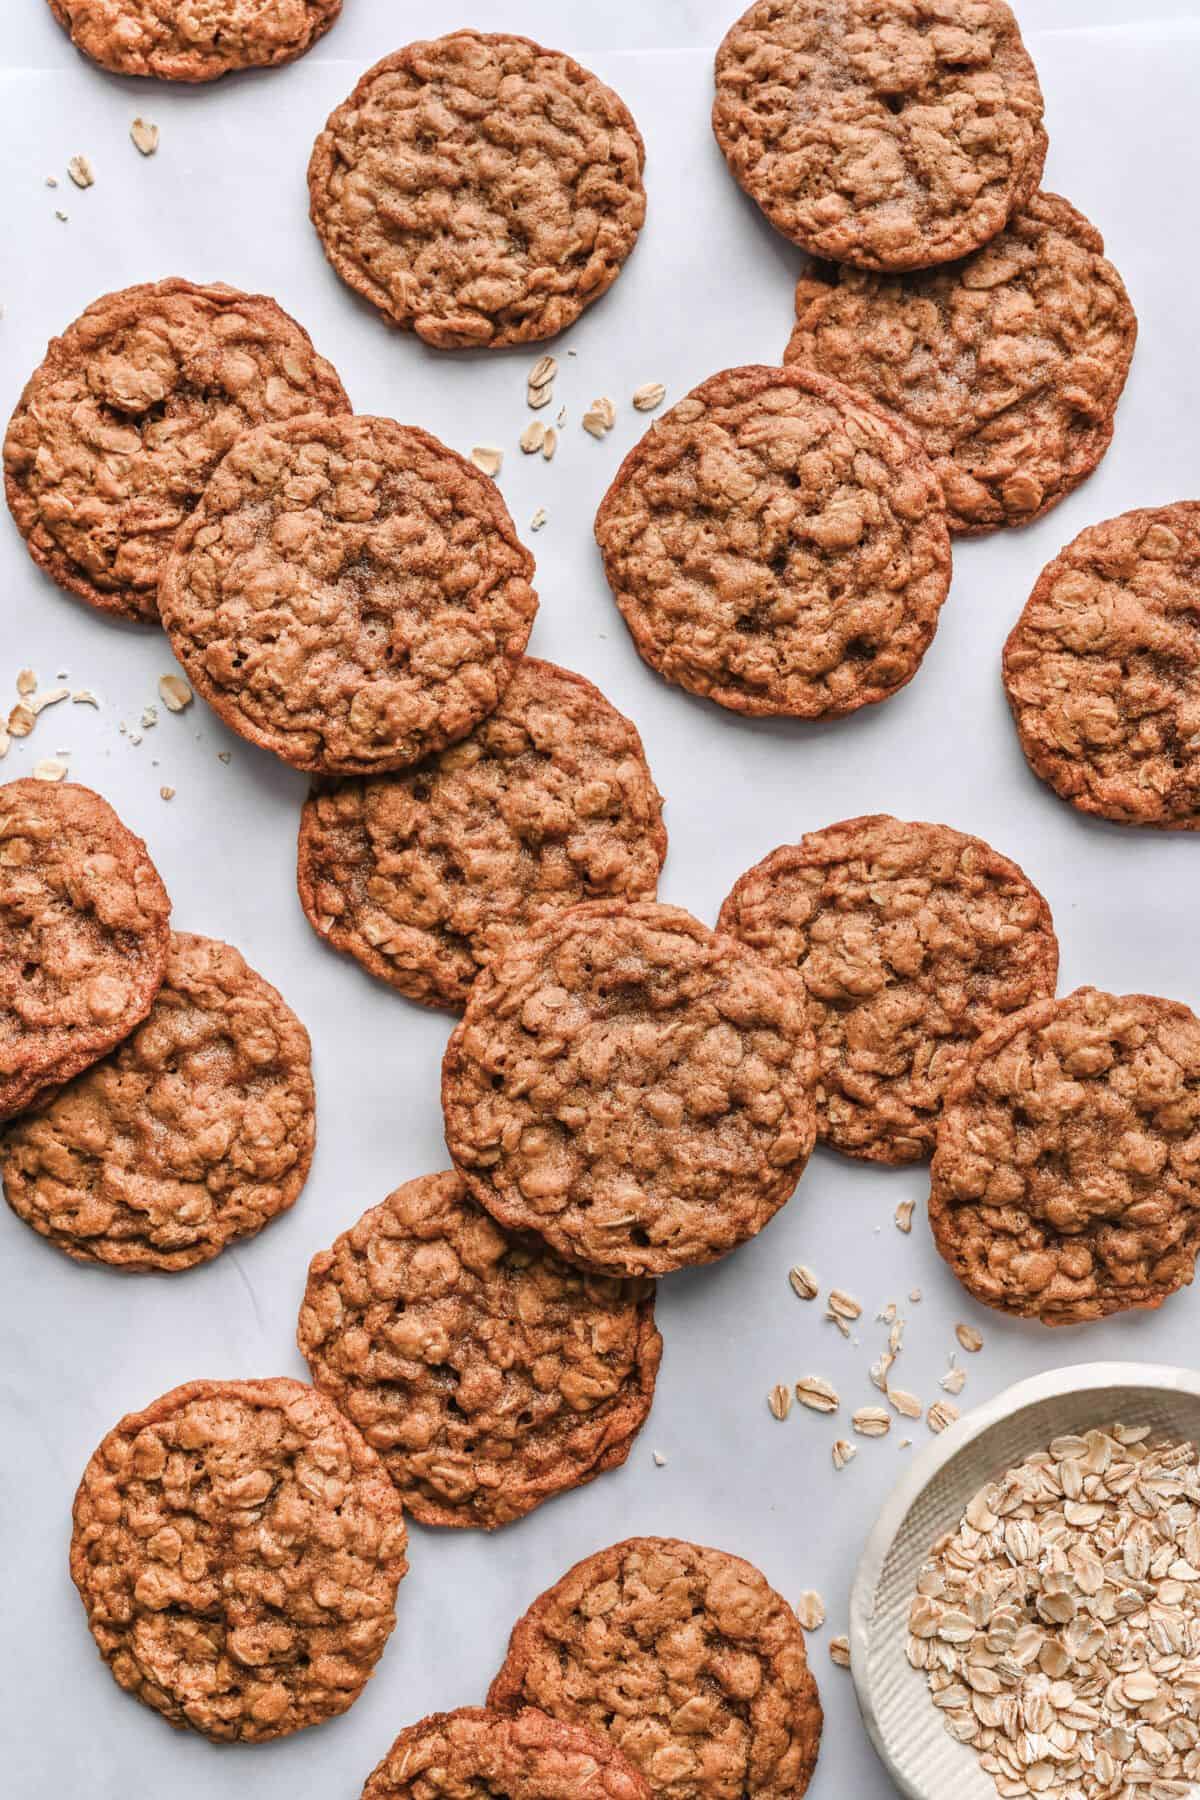 Oatmeal cookies on parchment paper with a small bowl of oats.